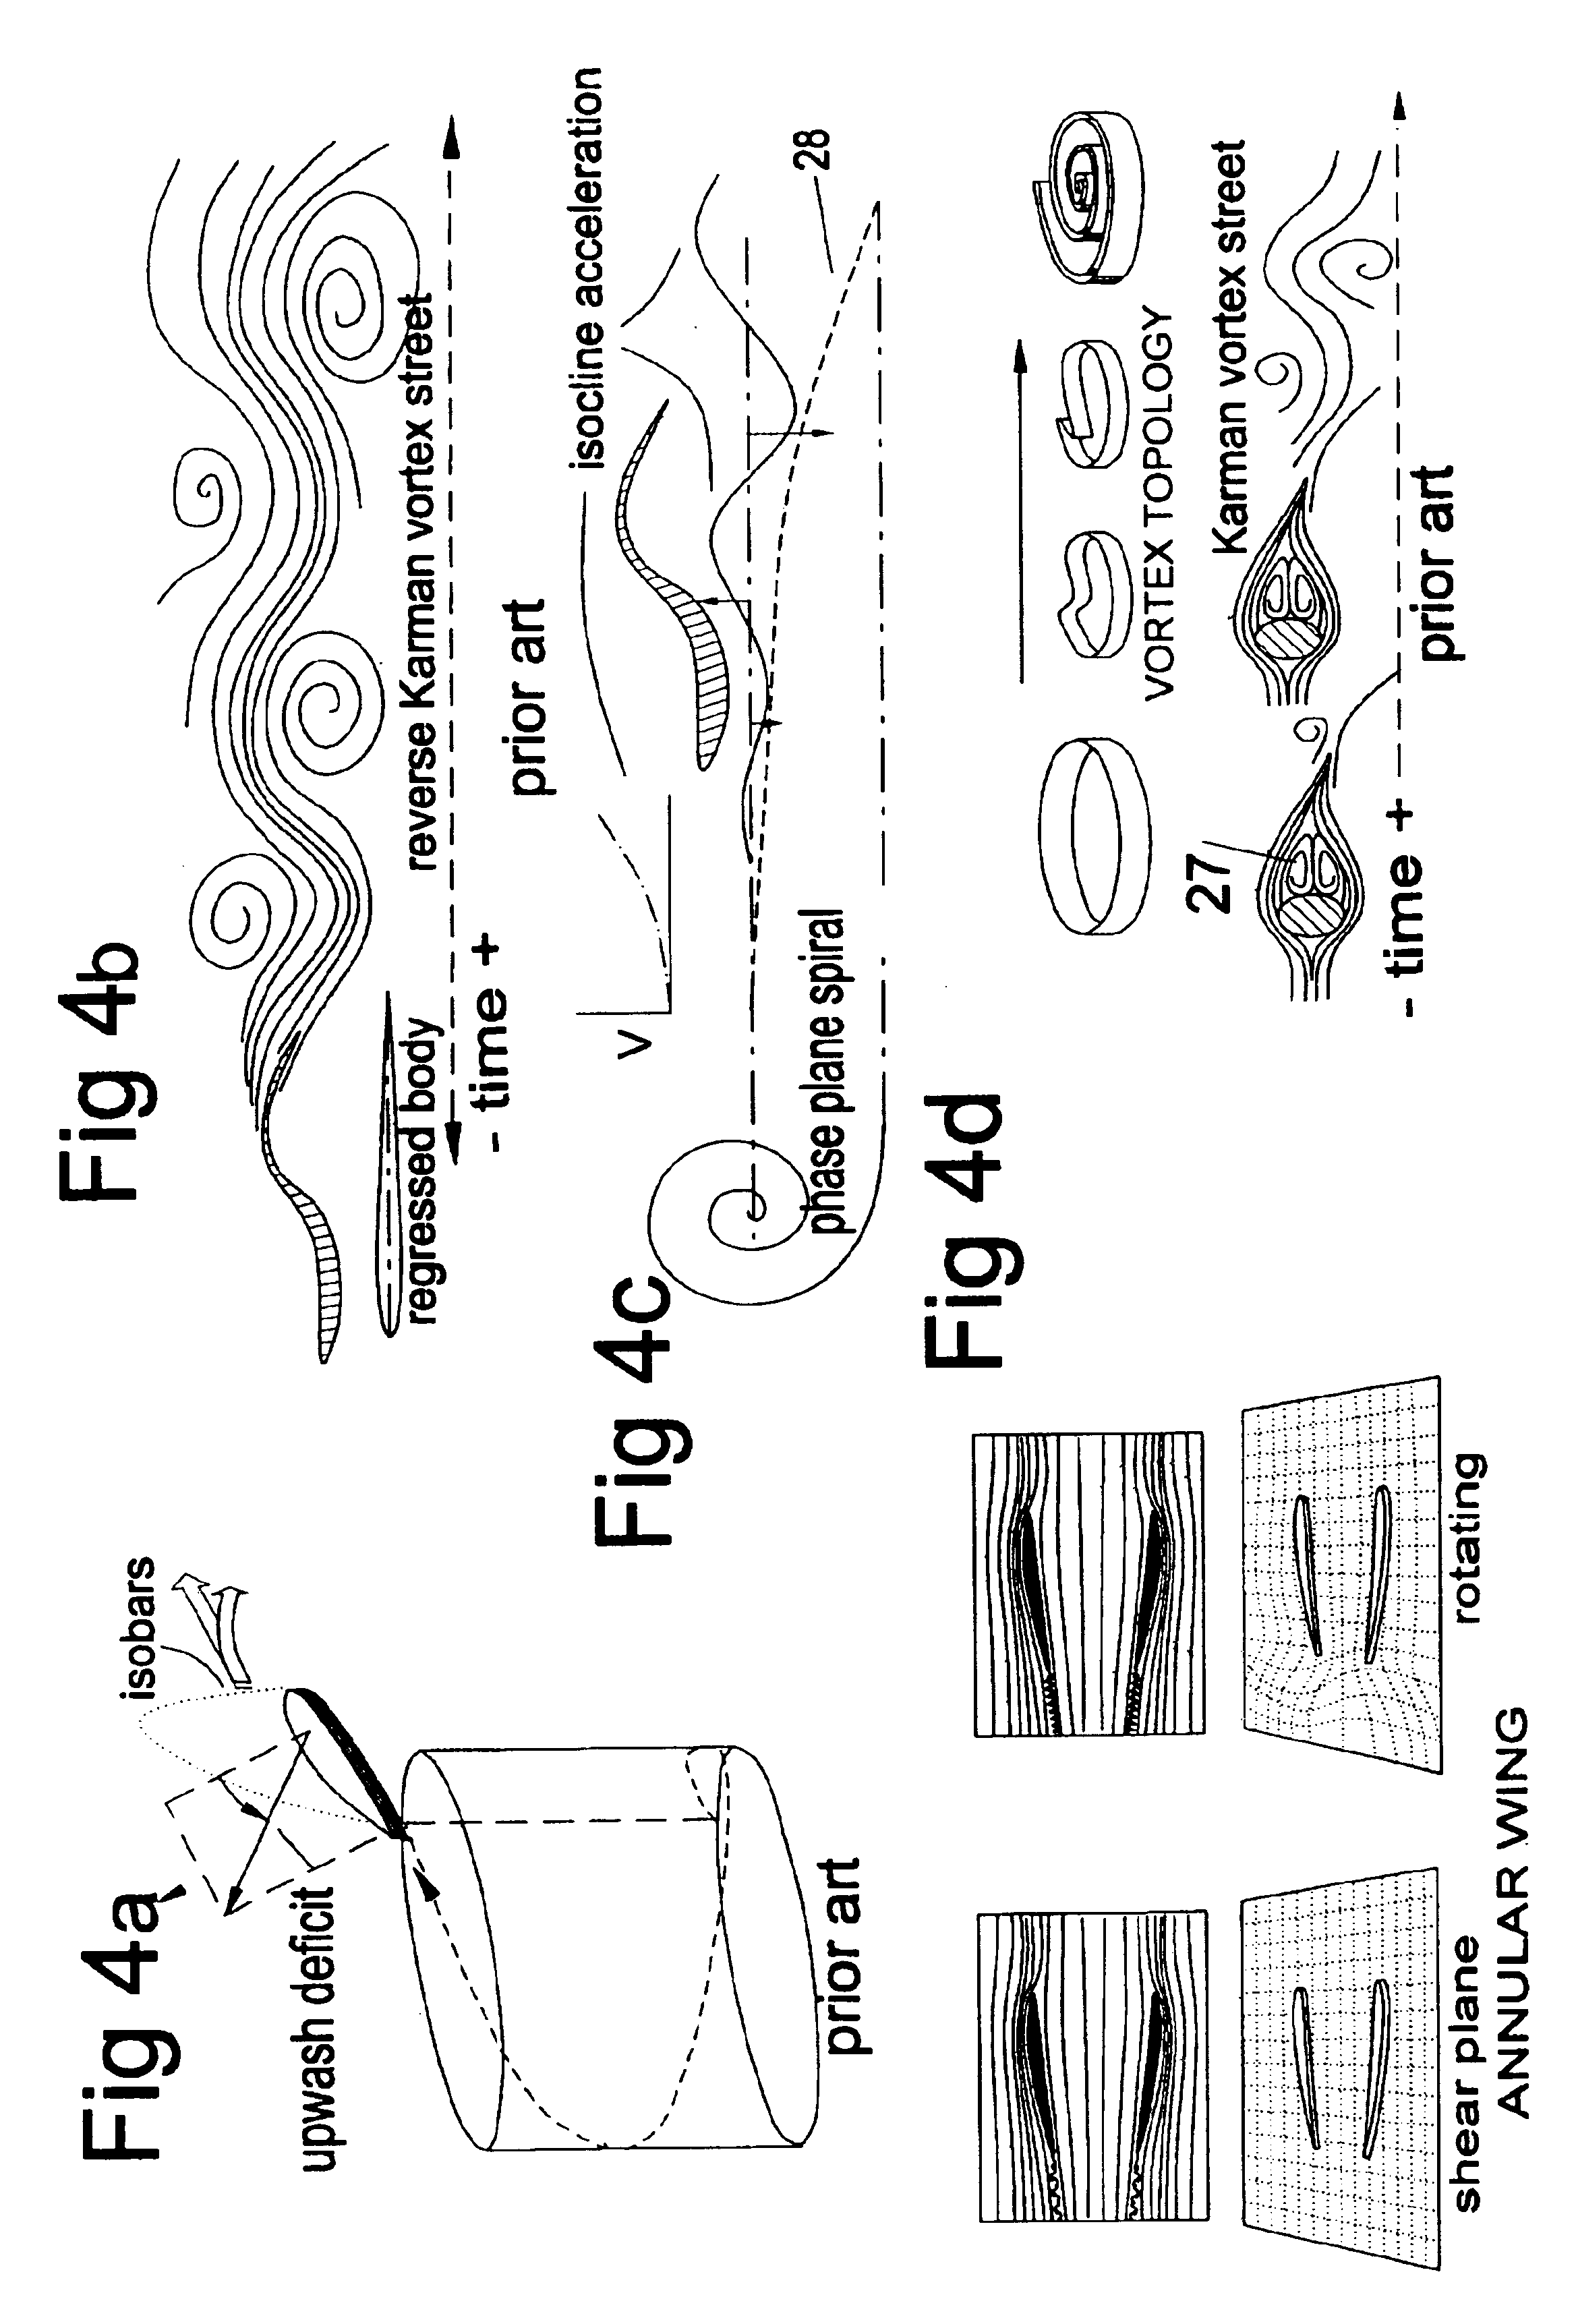 Spiral-based axial flow devices